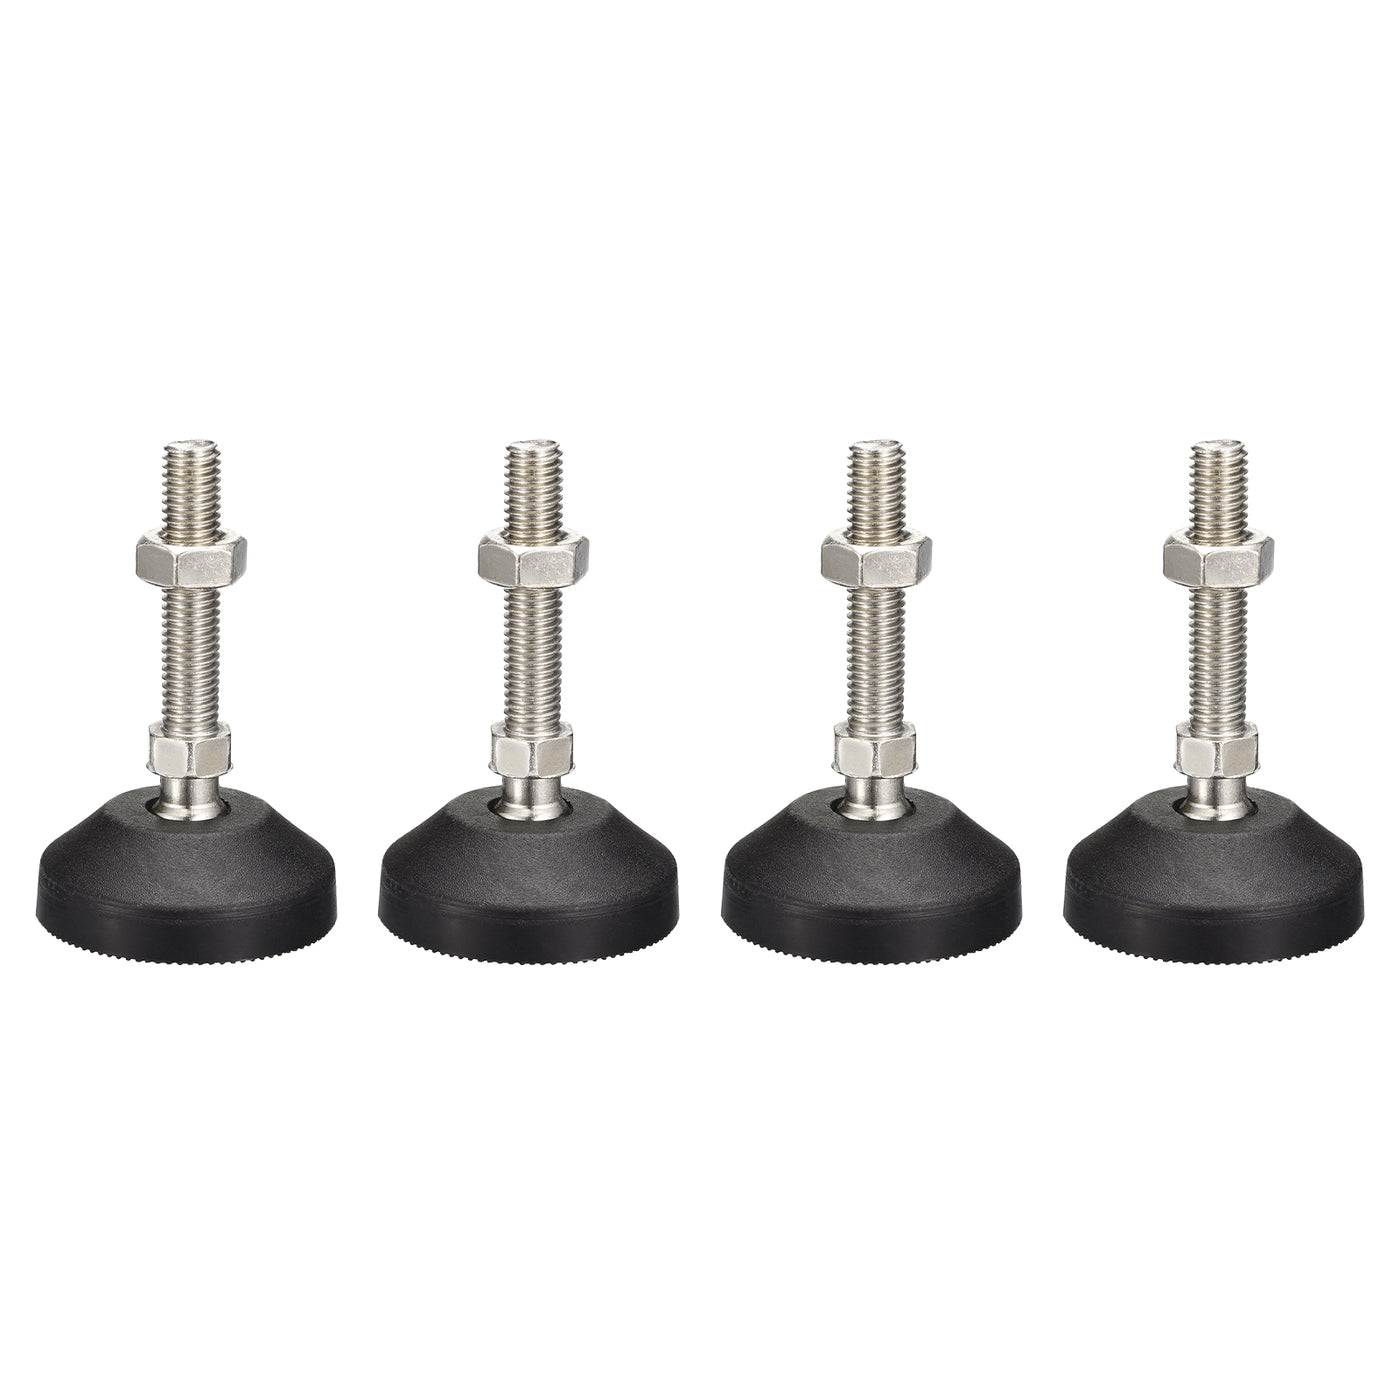 uxcell Uxcell Furniture Levelers, 4Pcs M10x50x50mm Nylon Universal Leveling Feet, Adjustable Swivel Table Feet for Furniture Workshop Machines Machinery Equipment